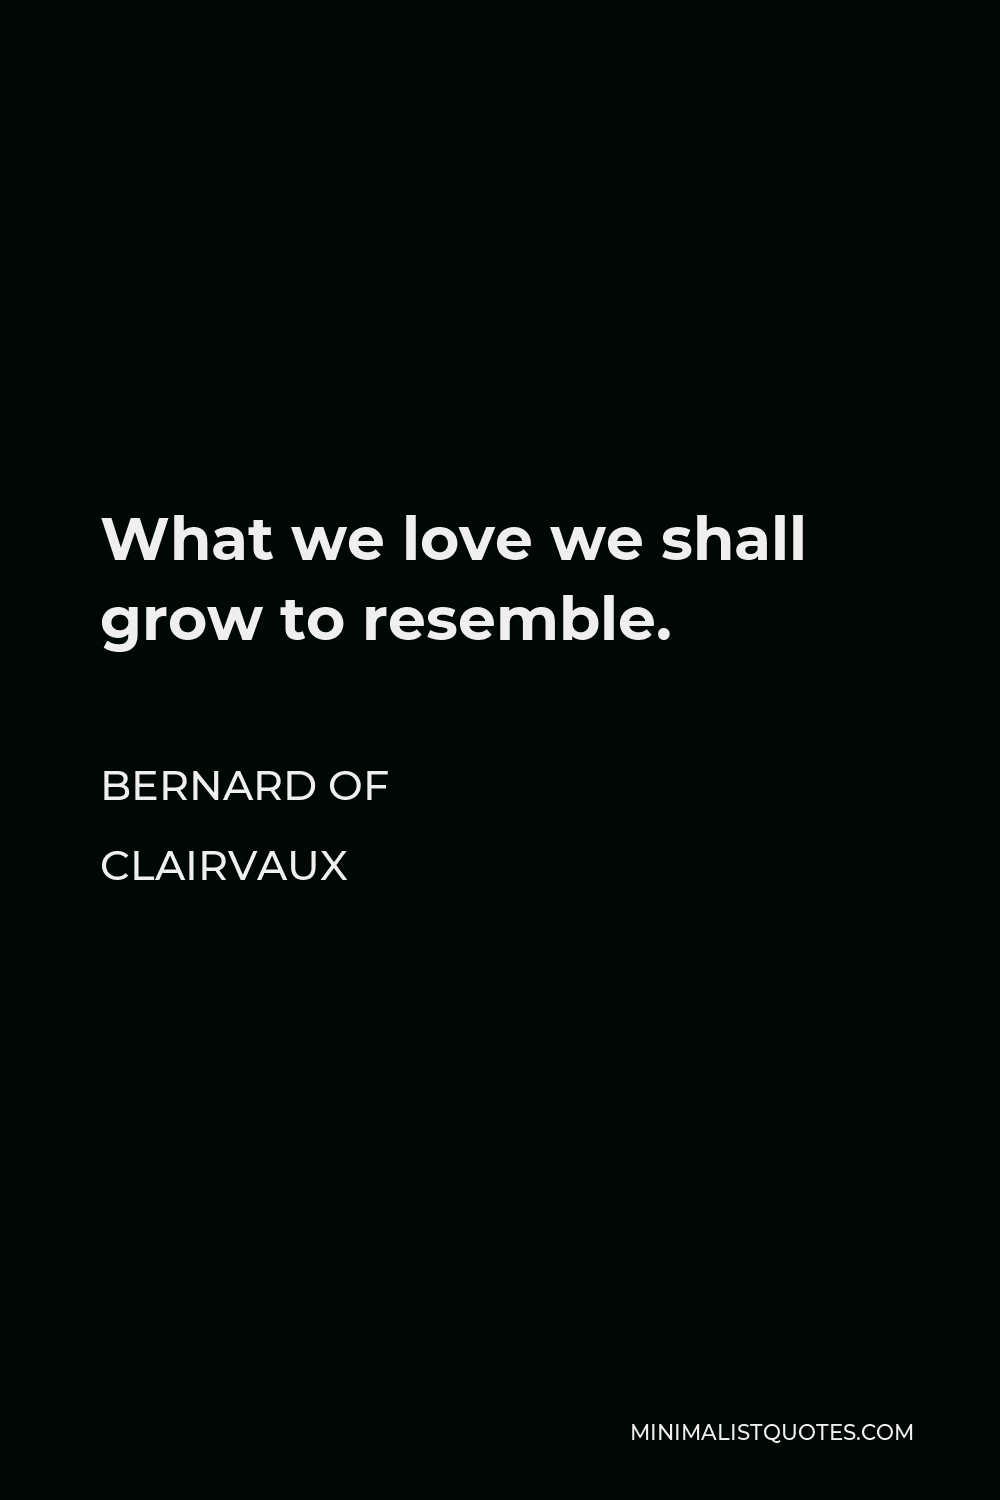 Bernard of Clairvaux Quote - What we love we shall grow to resemble.